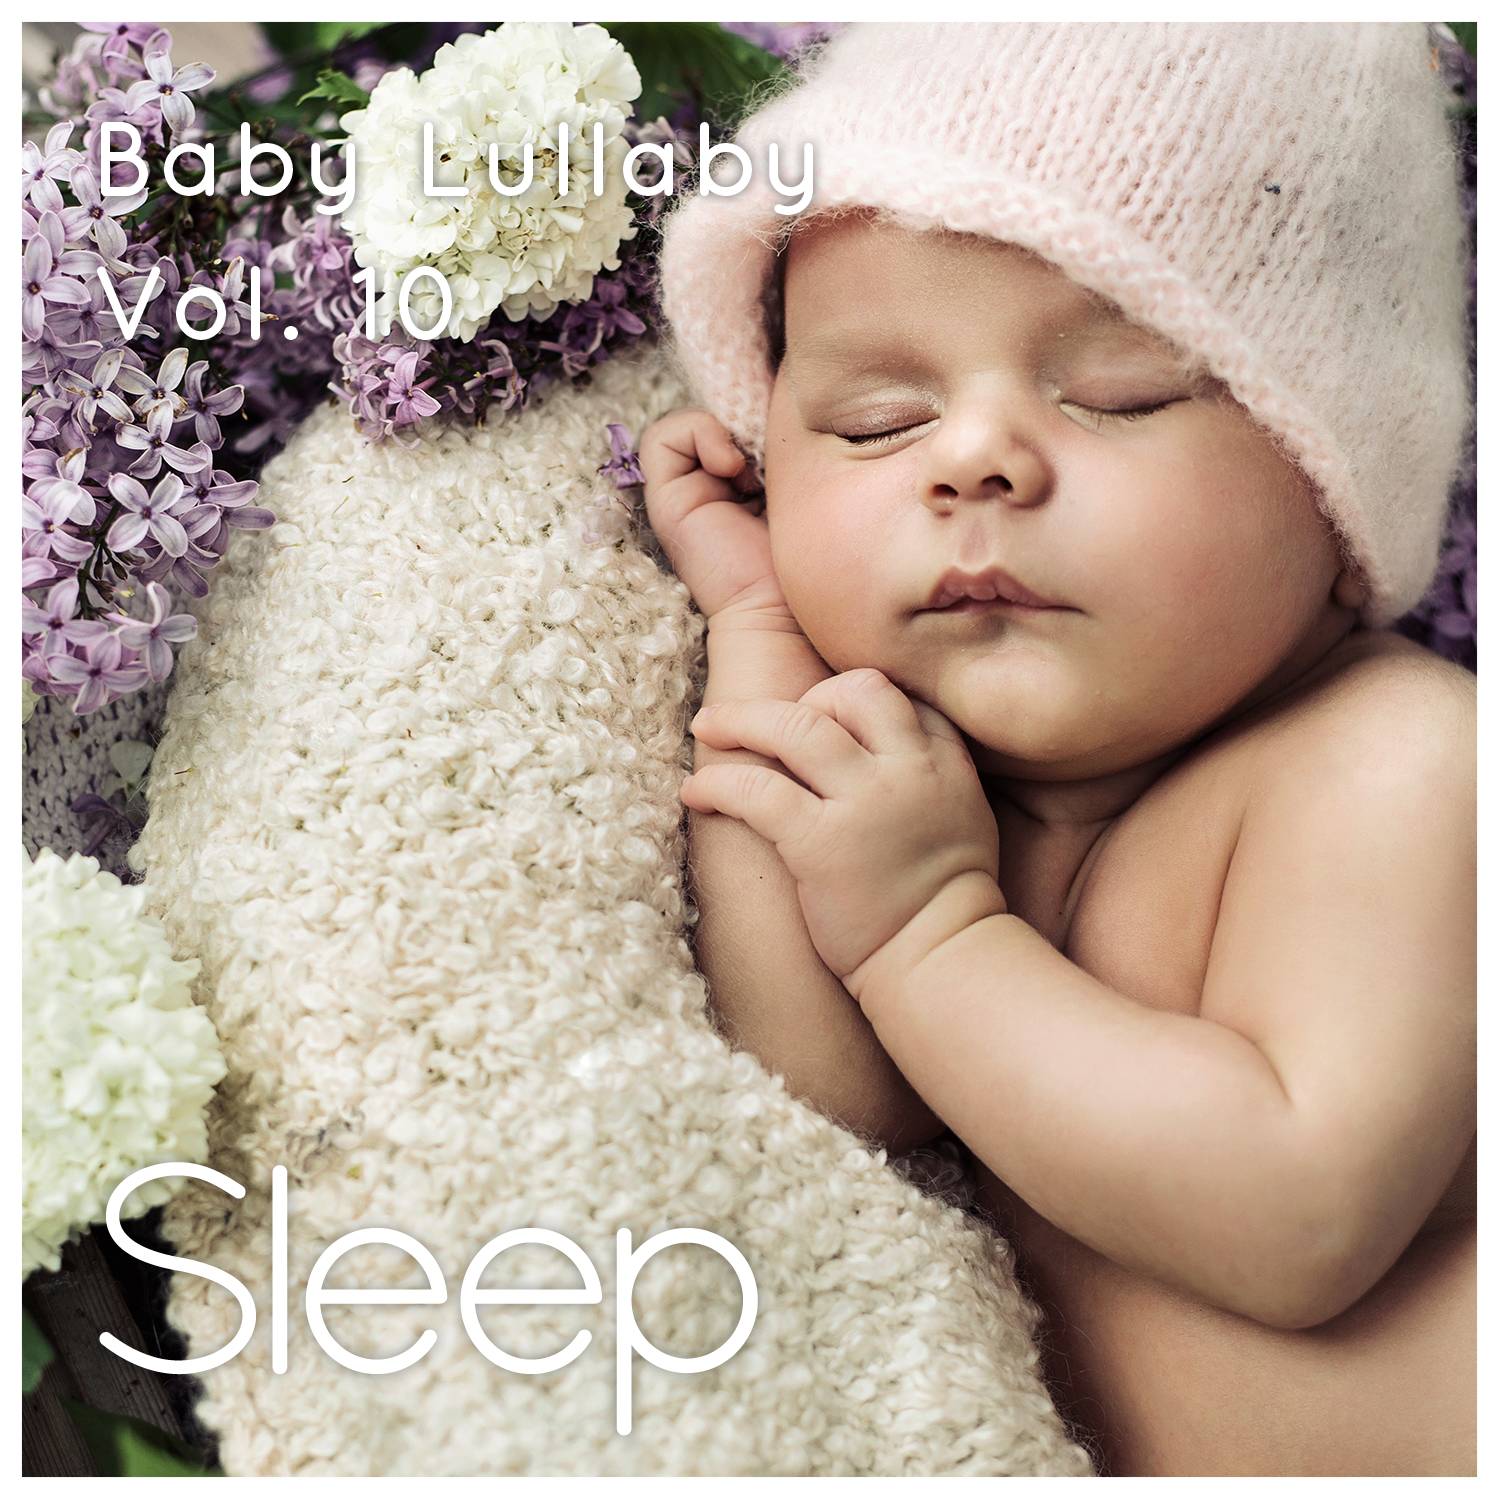 Baby Sleep Ambient Lullaby, Pt. 50